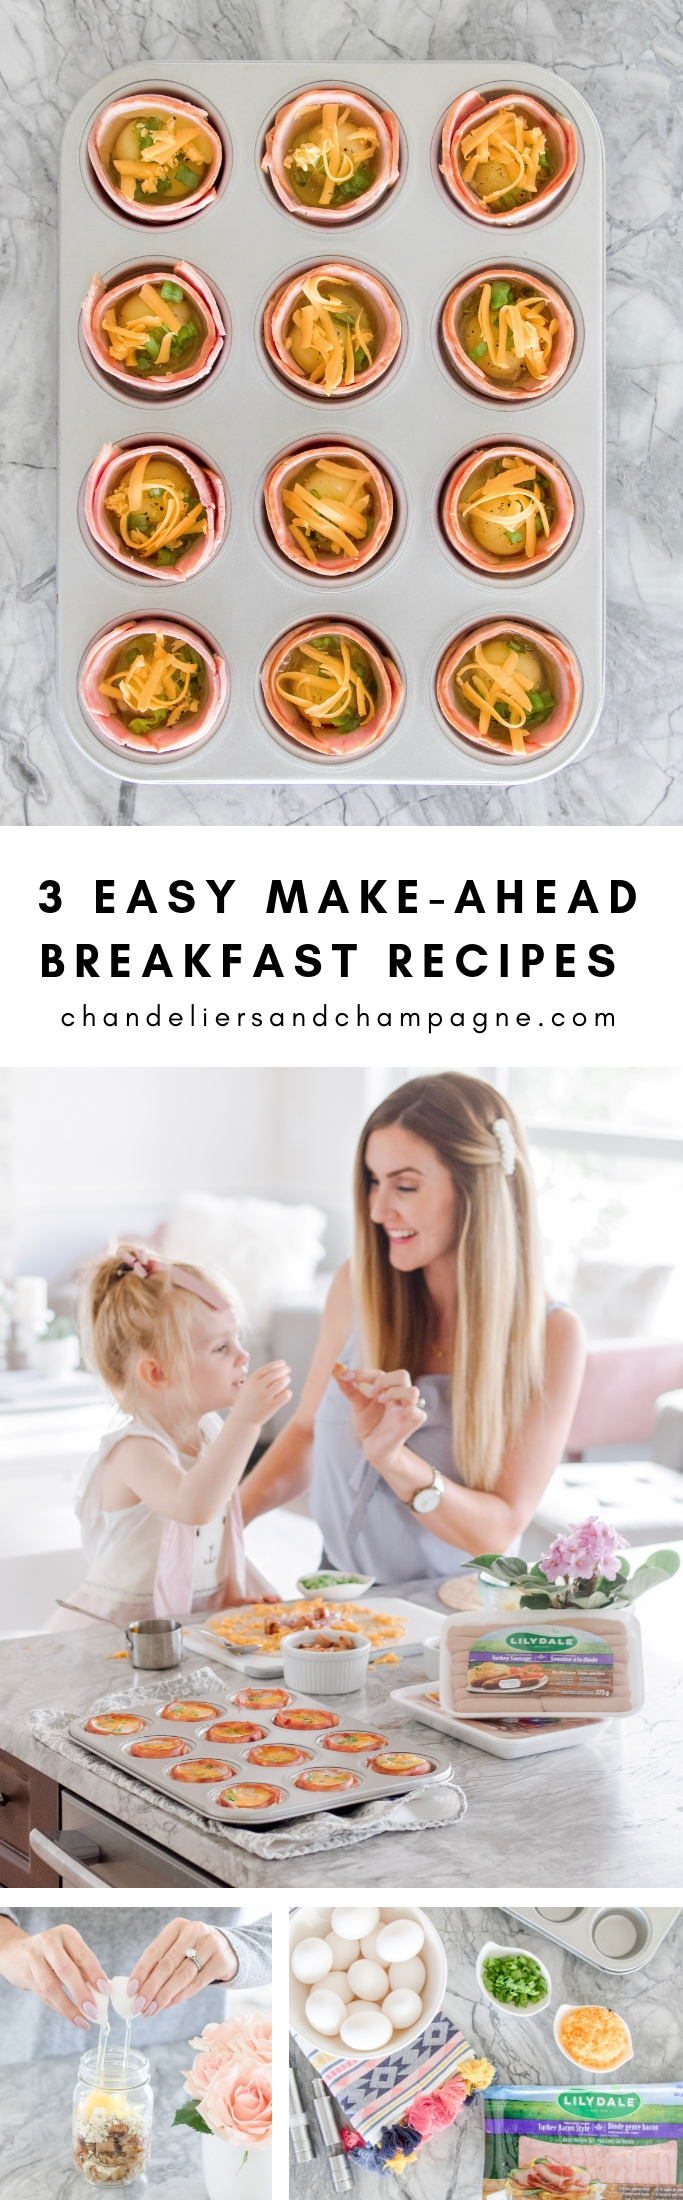 3 Easy Make-Ahead Breakfast Recipes: Turkey Bacon-Wrapped Egg Cups, Breakfast Quesadillas with Sausage, and Make-Ahead Breakfast Scrambles.